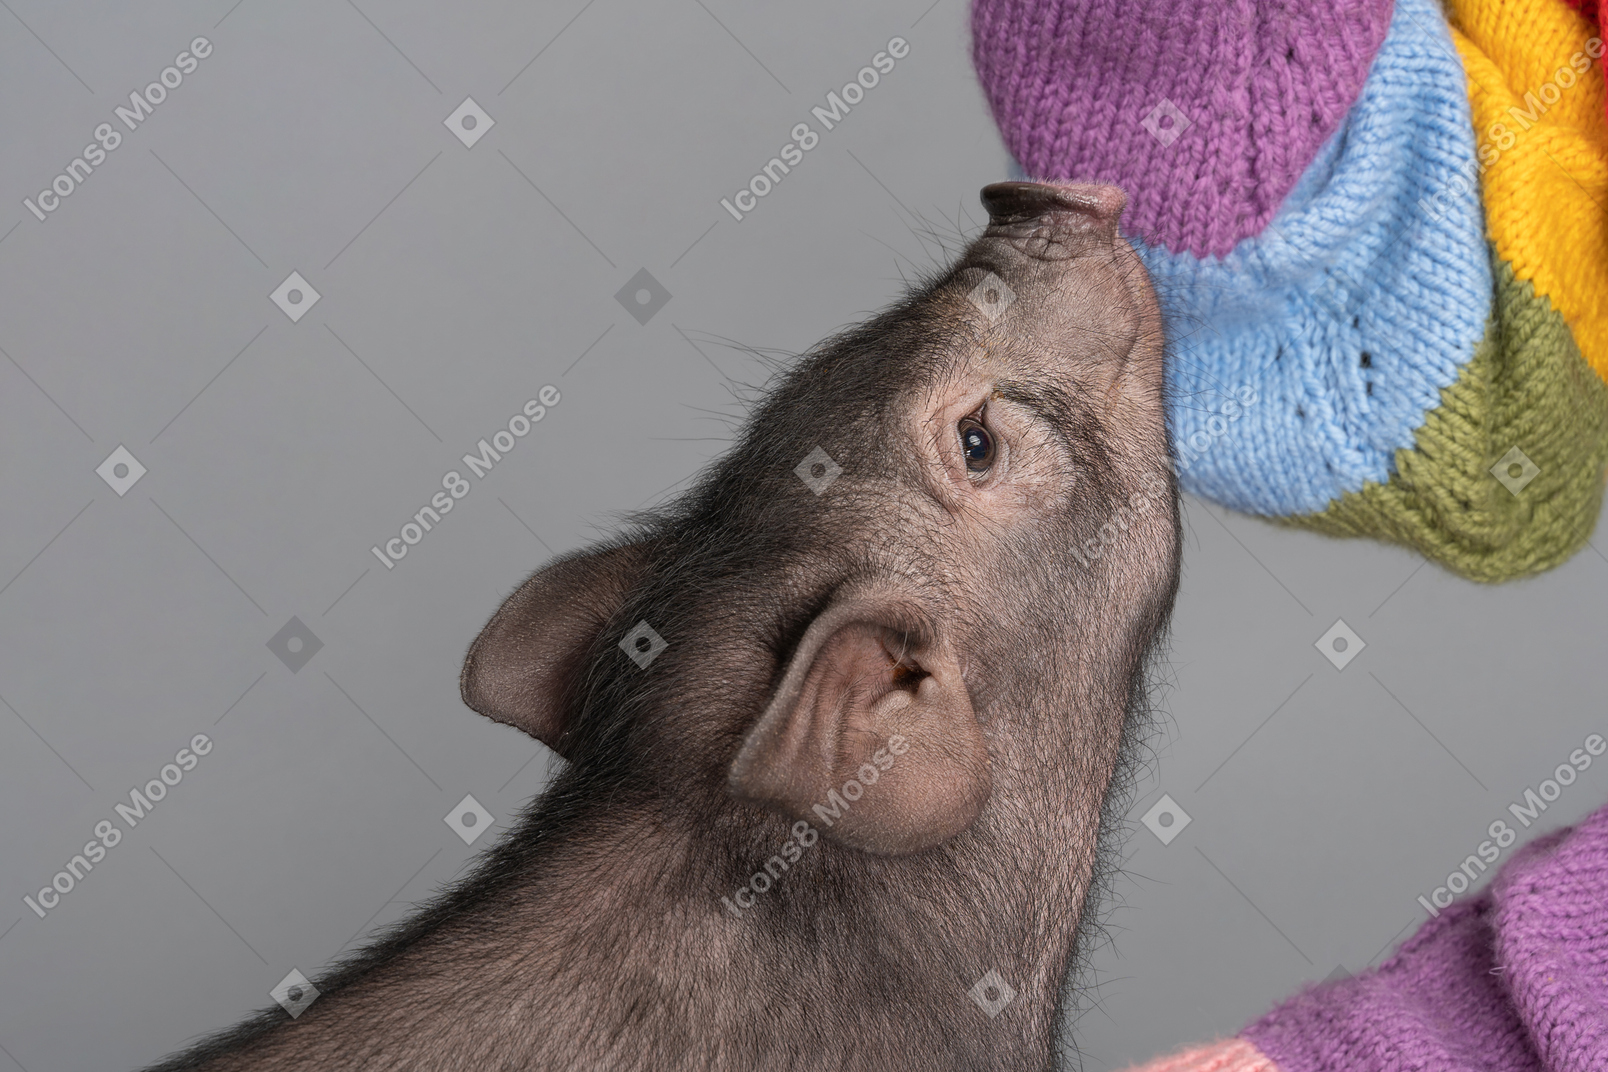 A human playing with a tiny pet pig